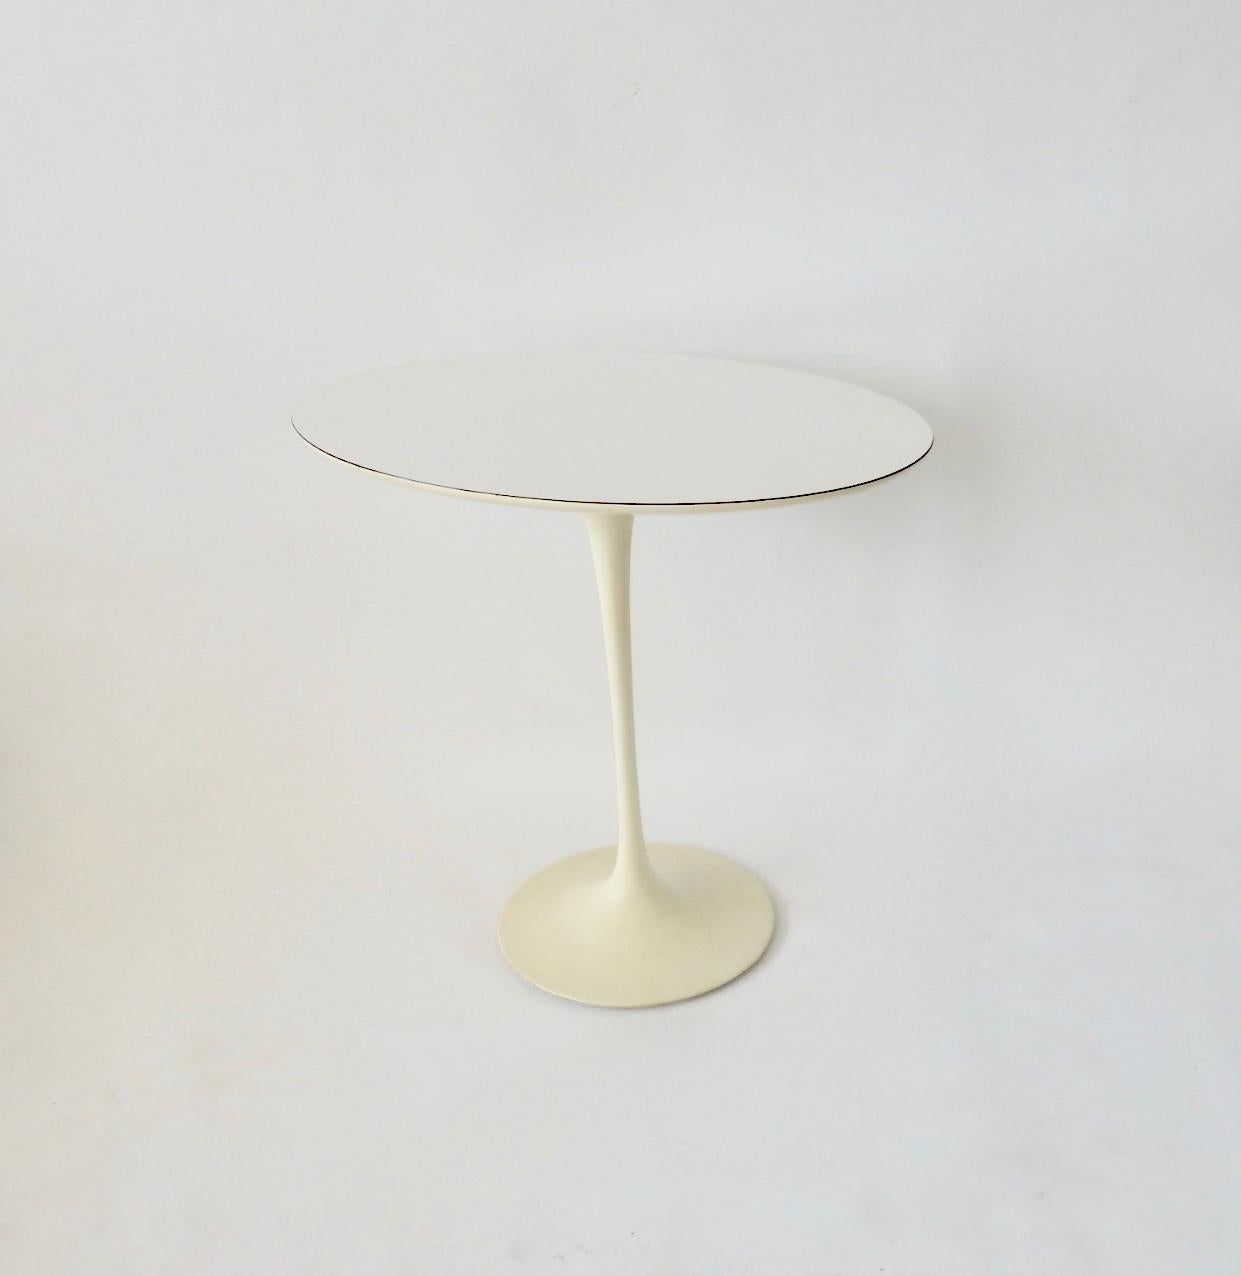  Tulip Table by Eero Saarinen for Knoll . Completely original finish on base and top . Please check back for cheaper shipping with top removed . 